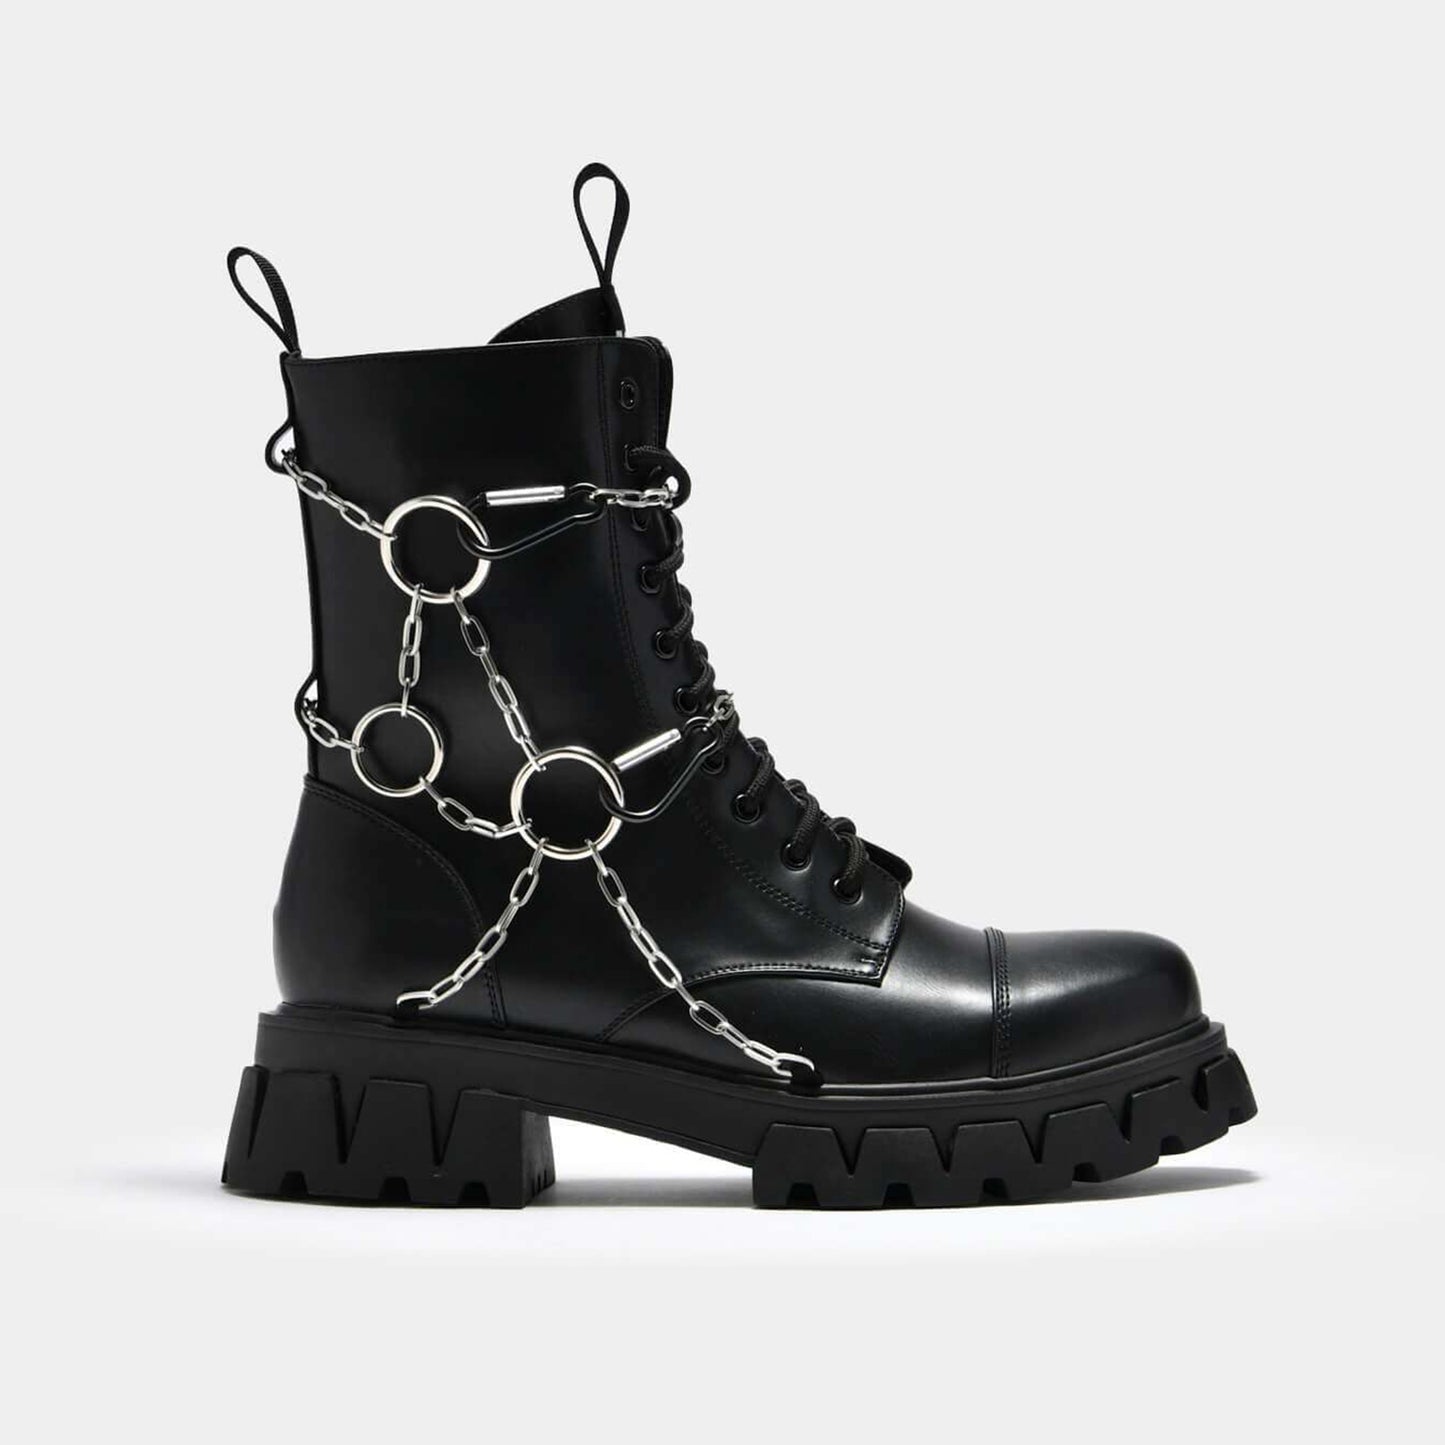 Cyrus Chain Boots - Ankle Boots - KOI Footwear - Black - Side View